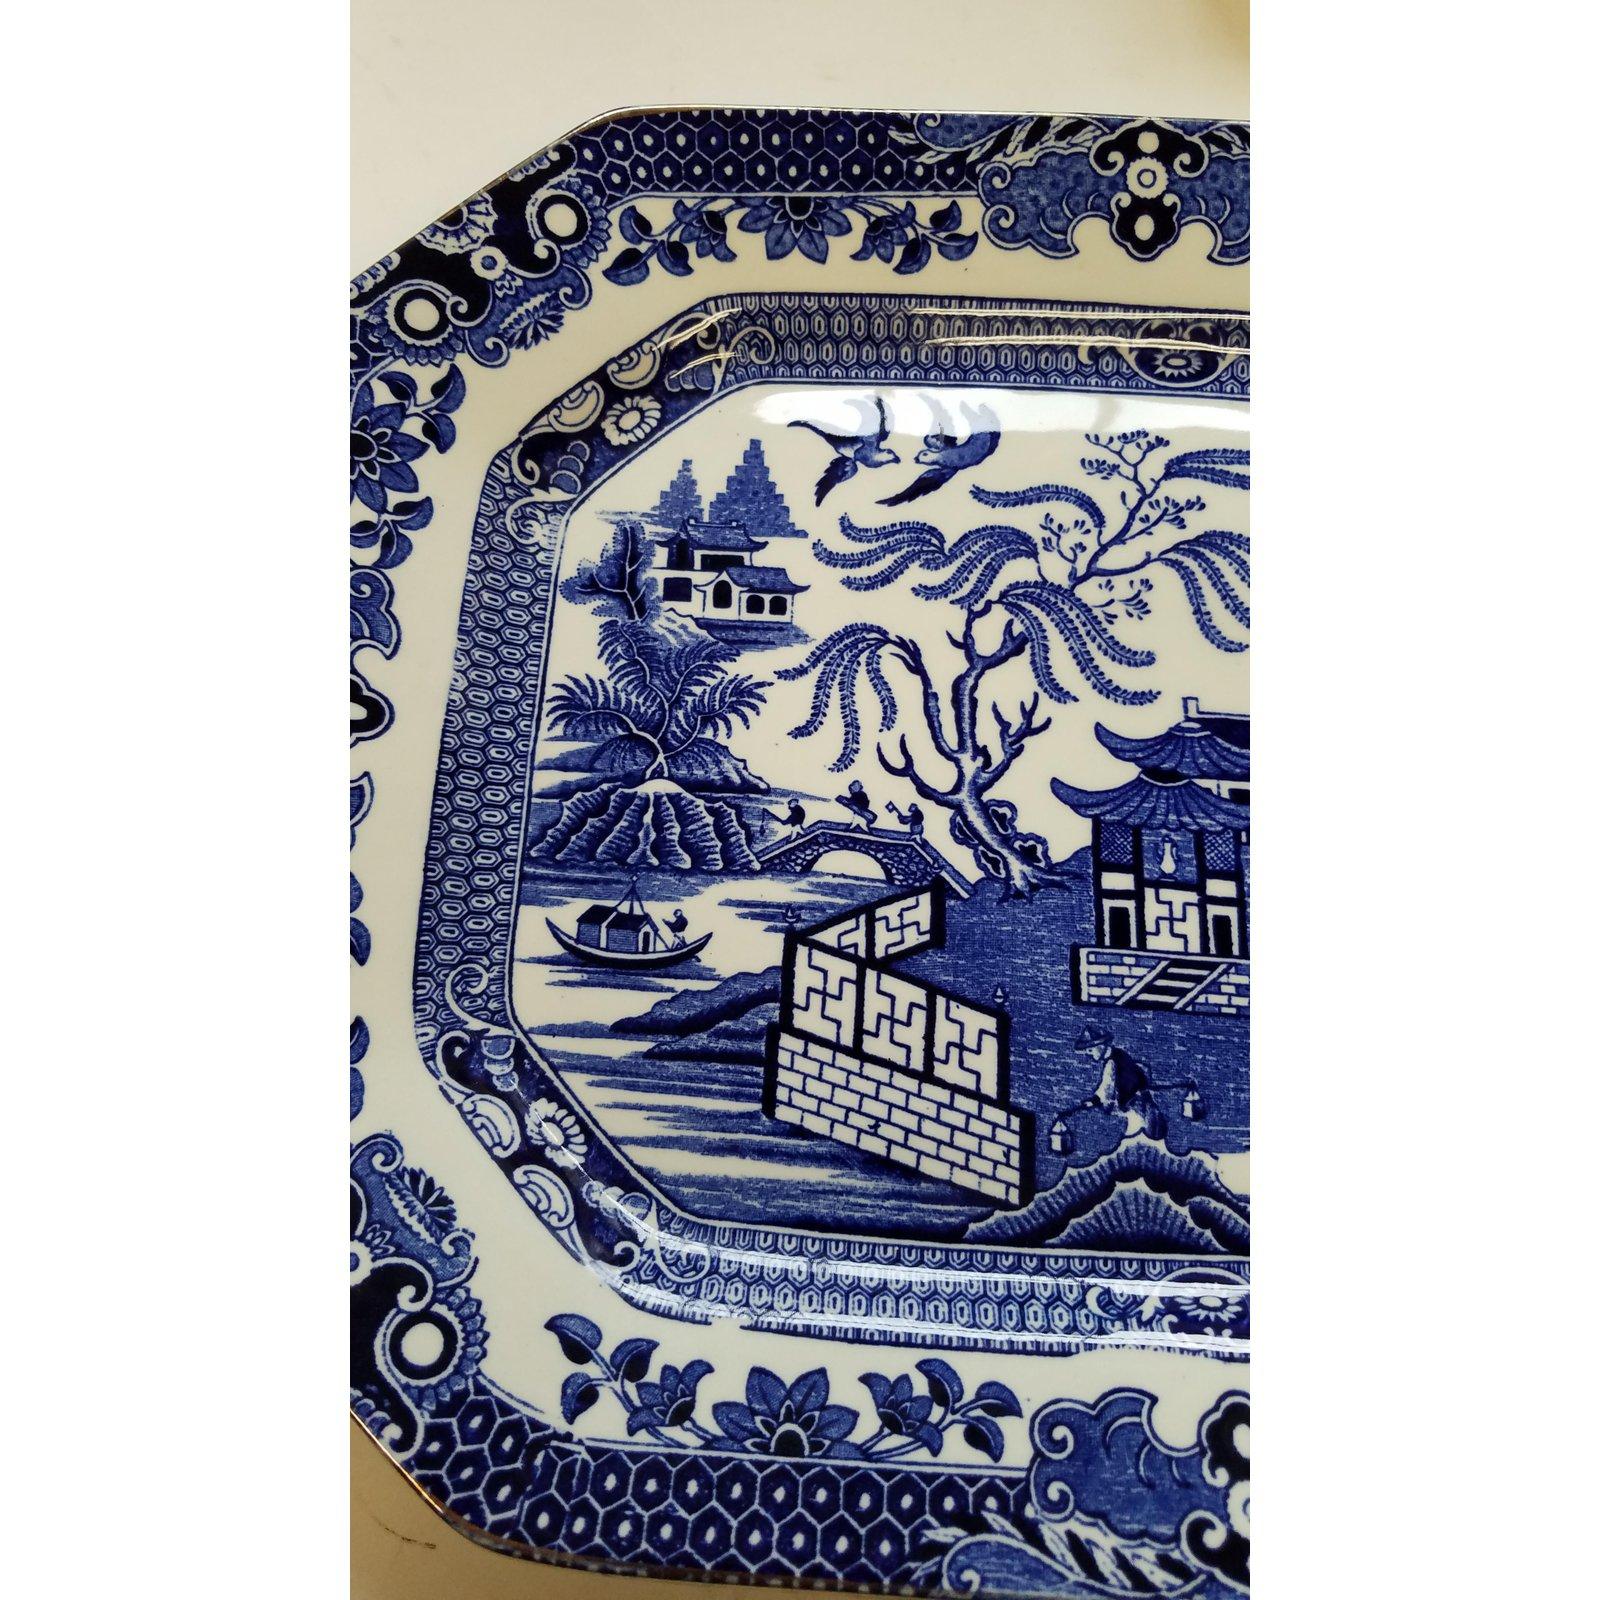 Antique willow pattern platter by Burleigh ware of England. Excellent quality and condition. A Classic decorating statement piece of antique English Blue WIllow.
Every piece of Burleigh is made by hand mixed with years of experience and passion.